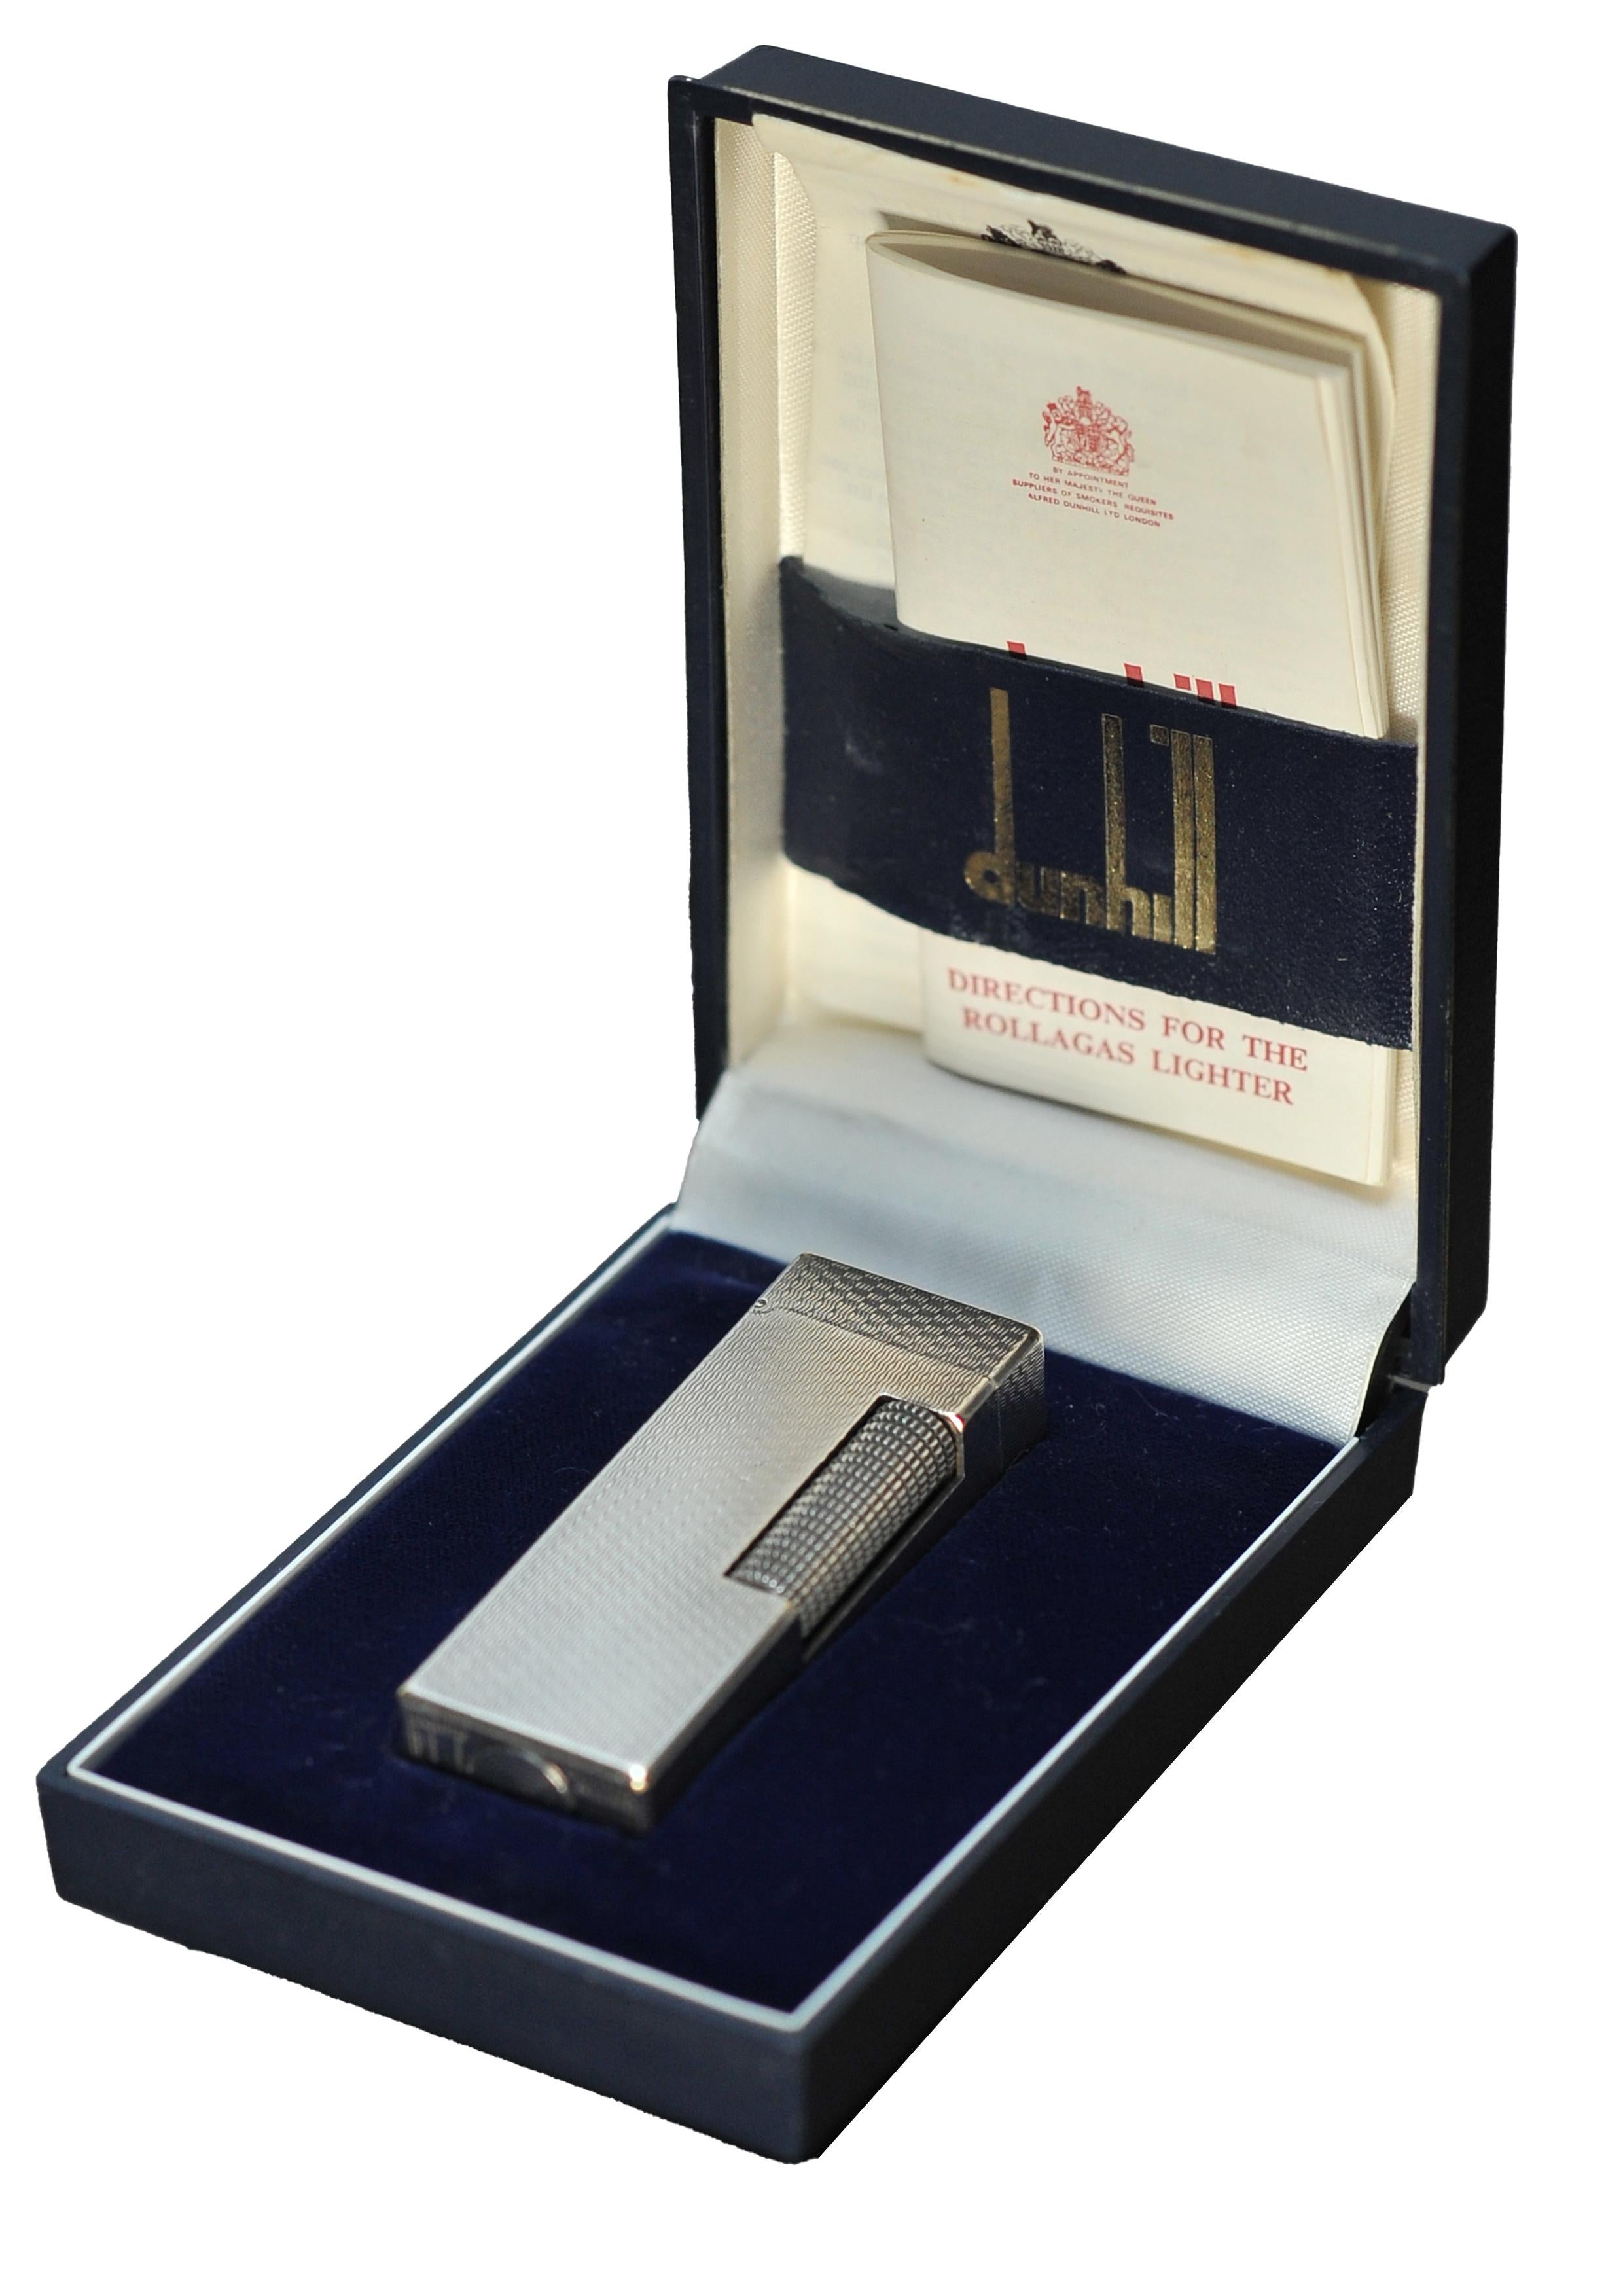 Alfred Dunhill Briquet Engine Turned Rollagas Cigarette Lighter With Dunhill Box For Sale 1